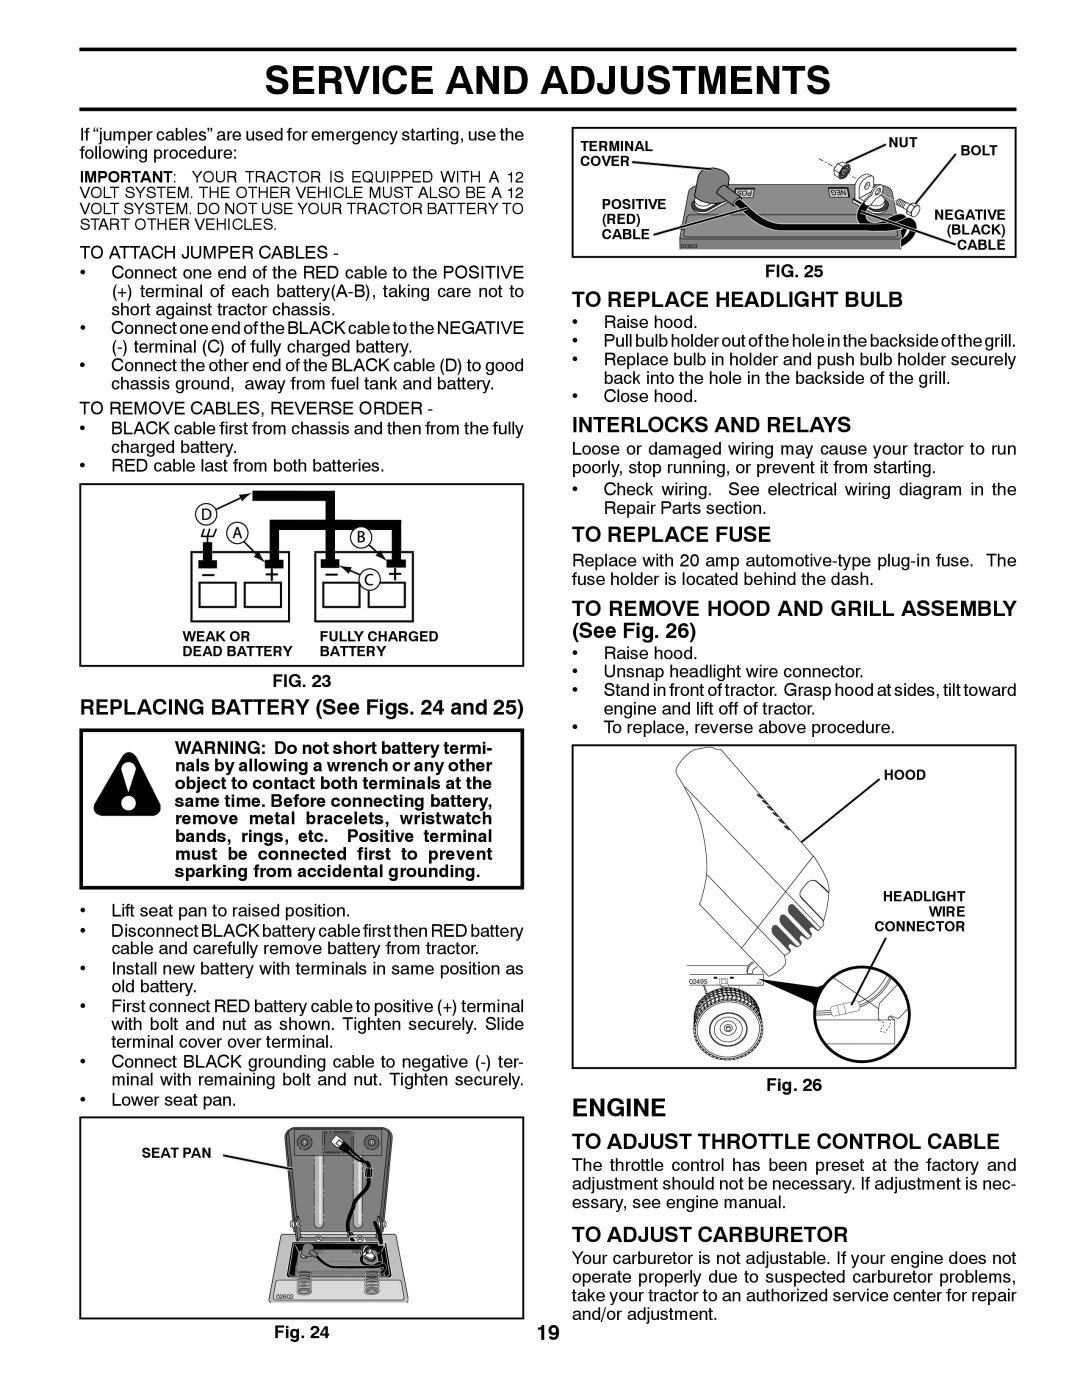 Poulan 424368 manual REPLACING BATTERY See Figs. 24 and, To Replace Headlight Bulb, Interlocks And Relays, To Replace Fuse 